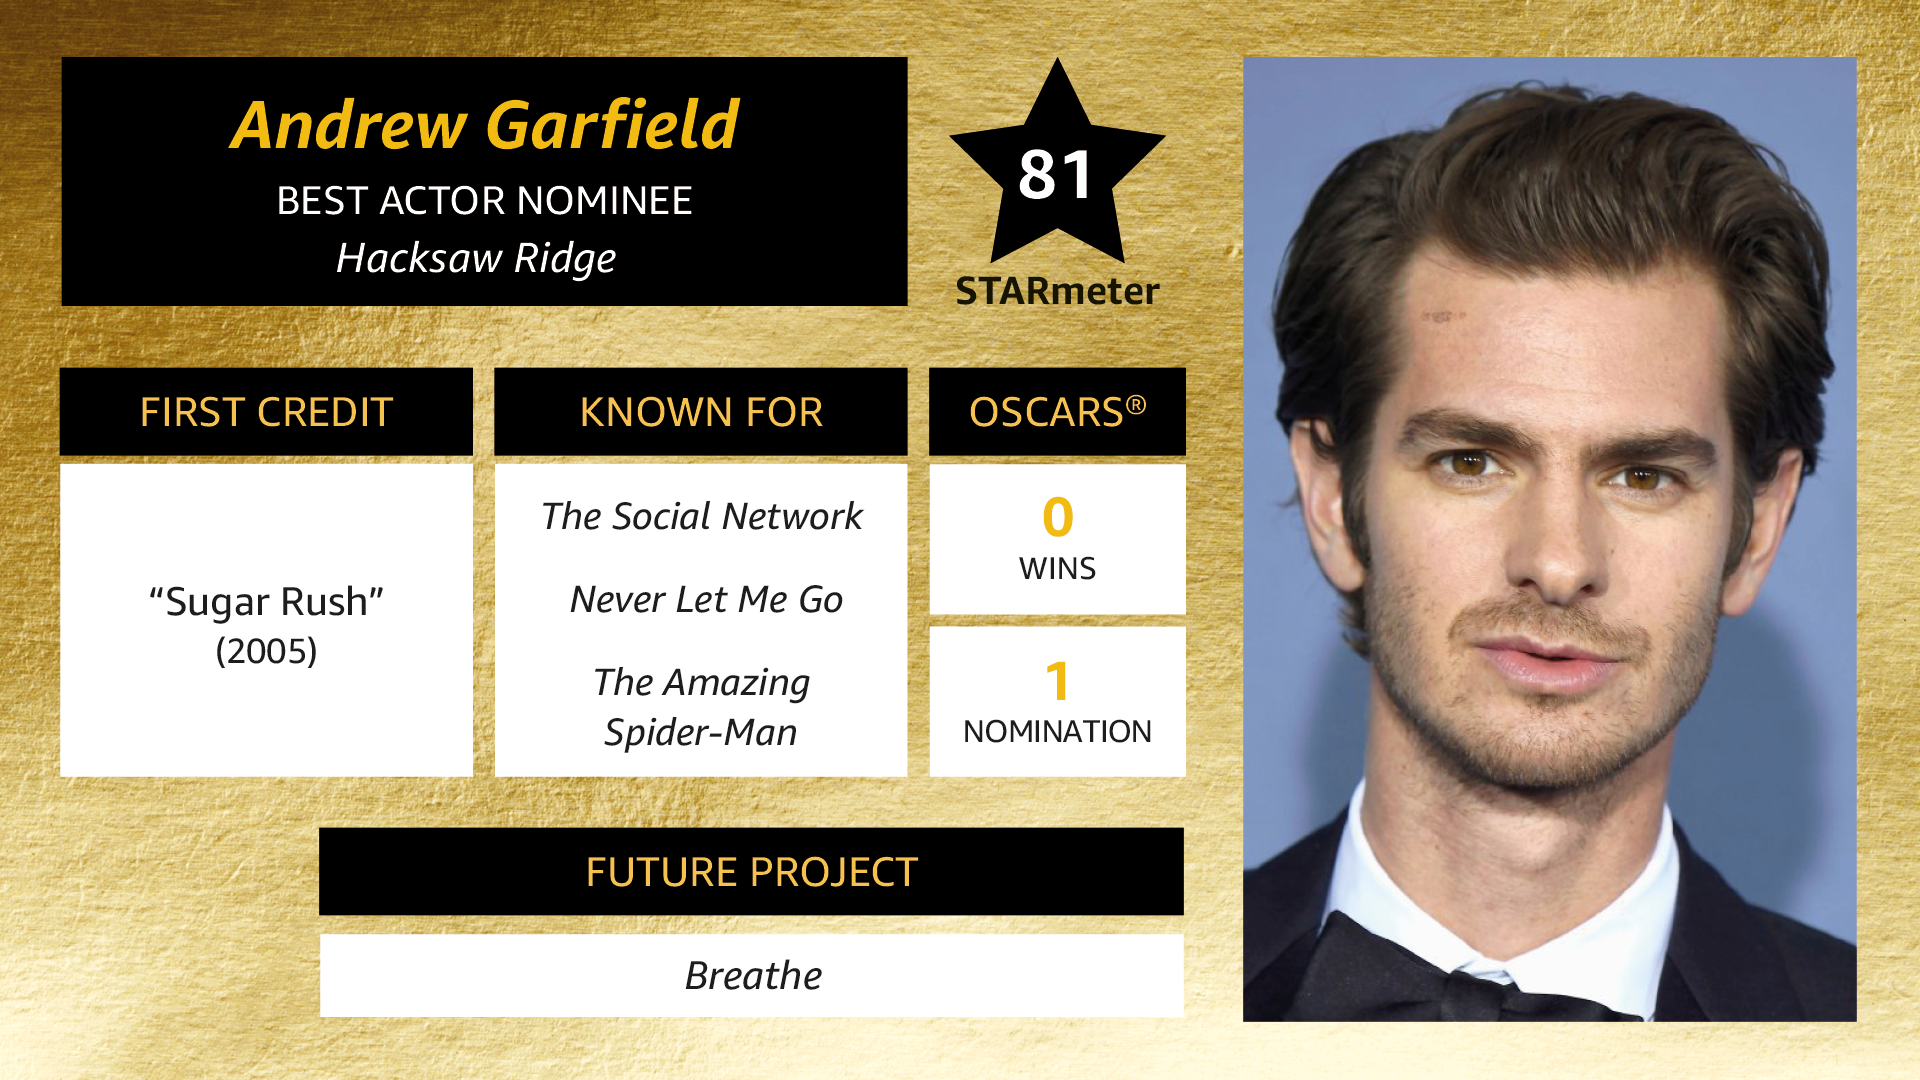 IMDb LIVE Viewing Party Profile Card - Andrew Garfield